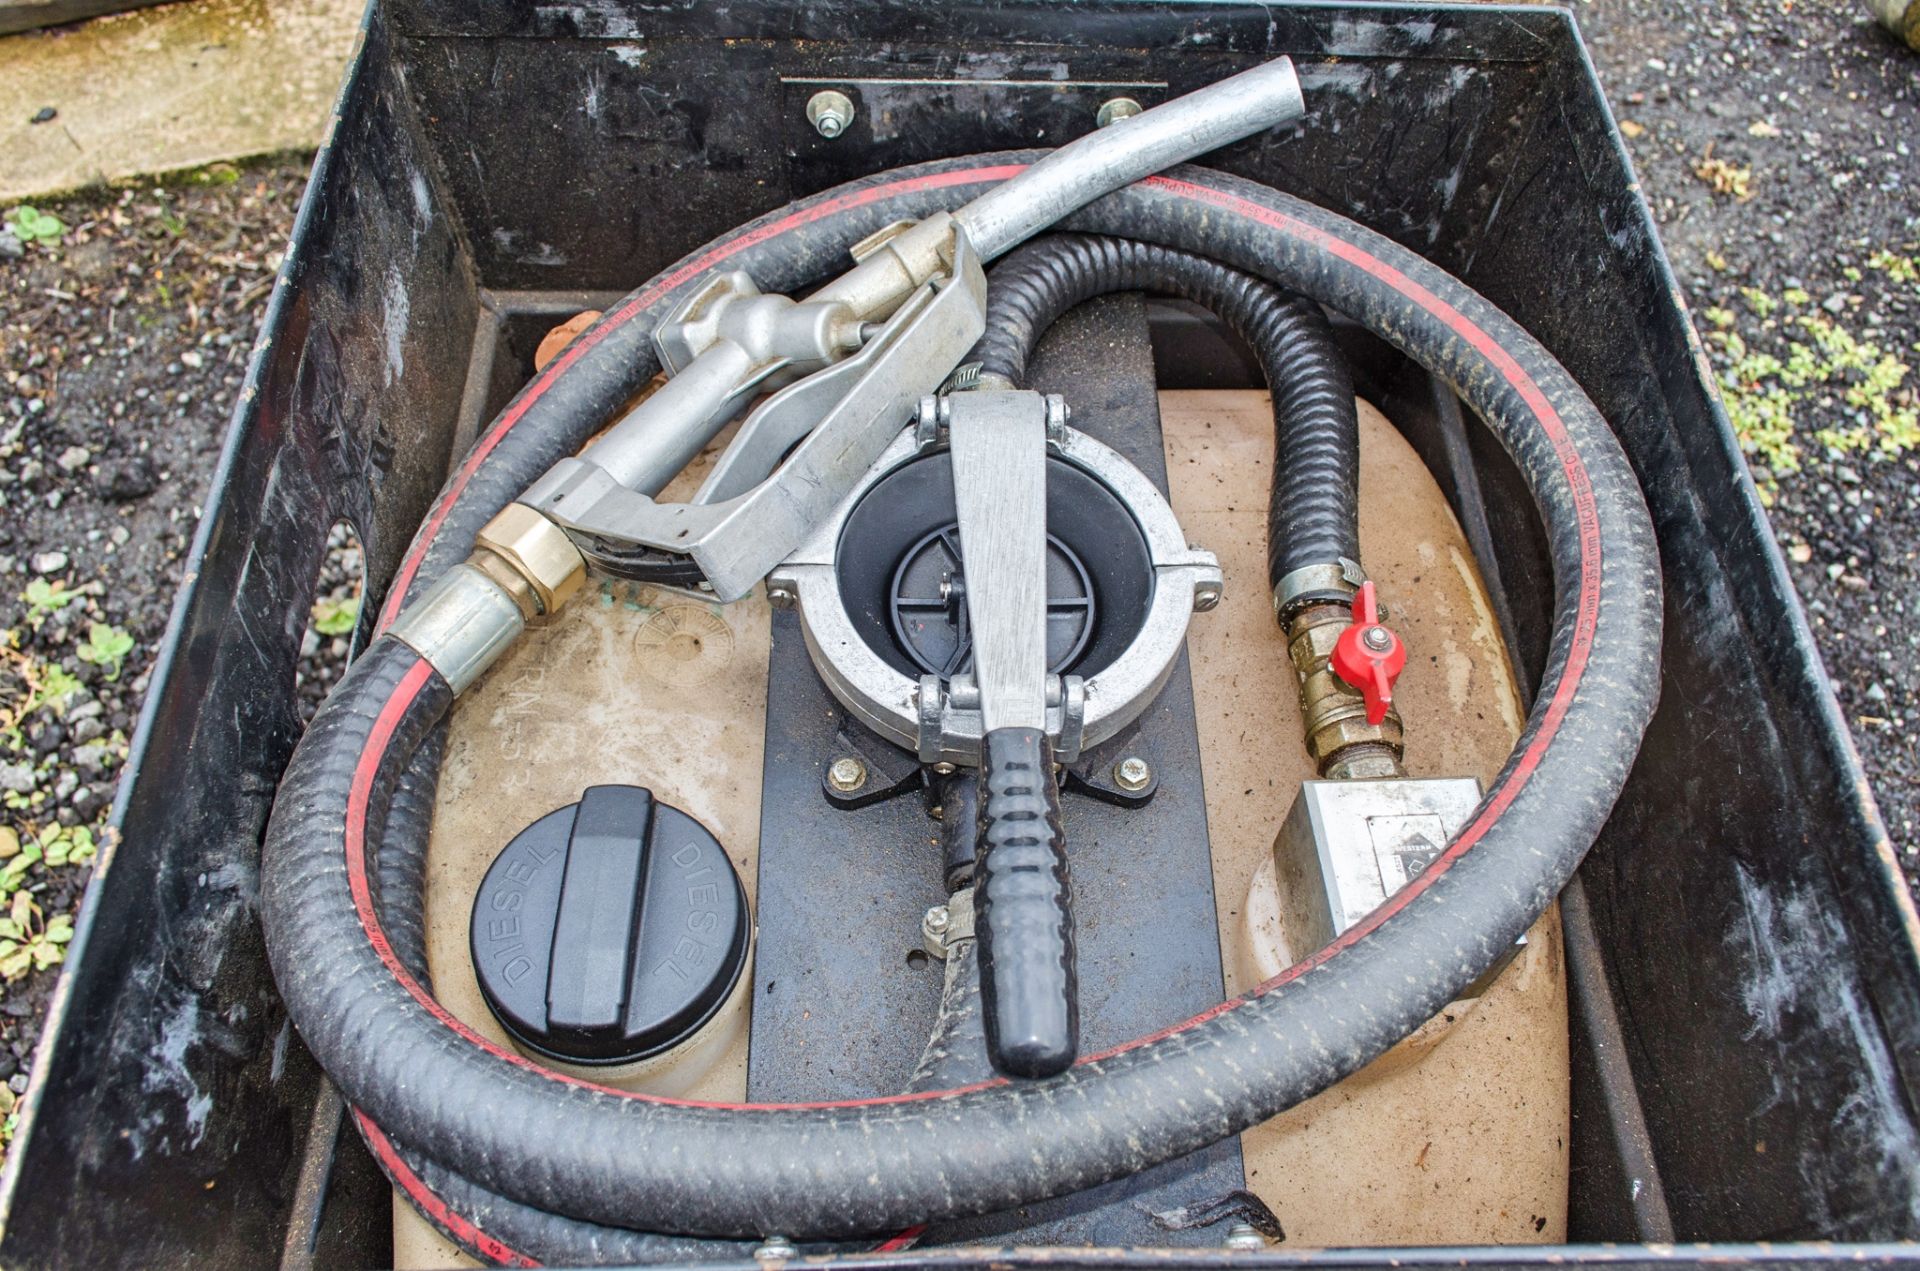 Western Easy Cube 105 litre bunded fuel bowser c/w manual pump, delivery hose and nozzle 221B0090 - Image 3 of 3